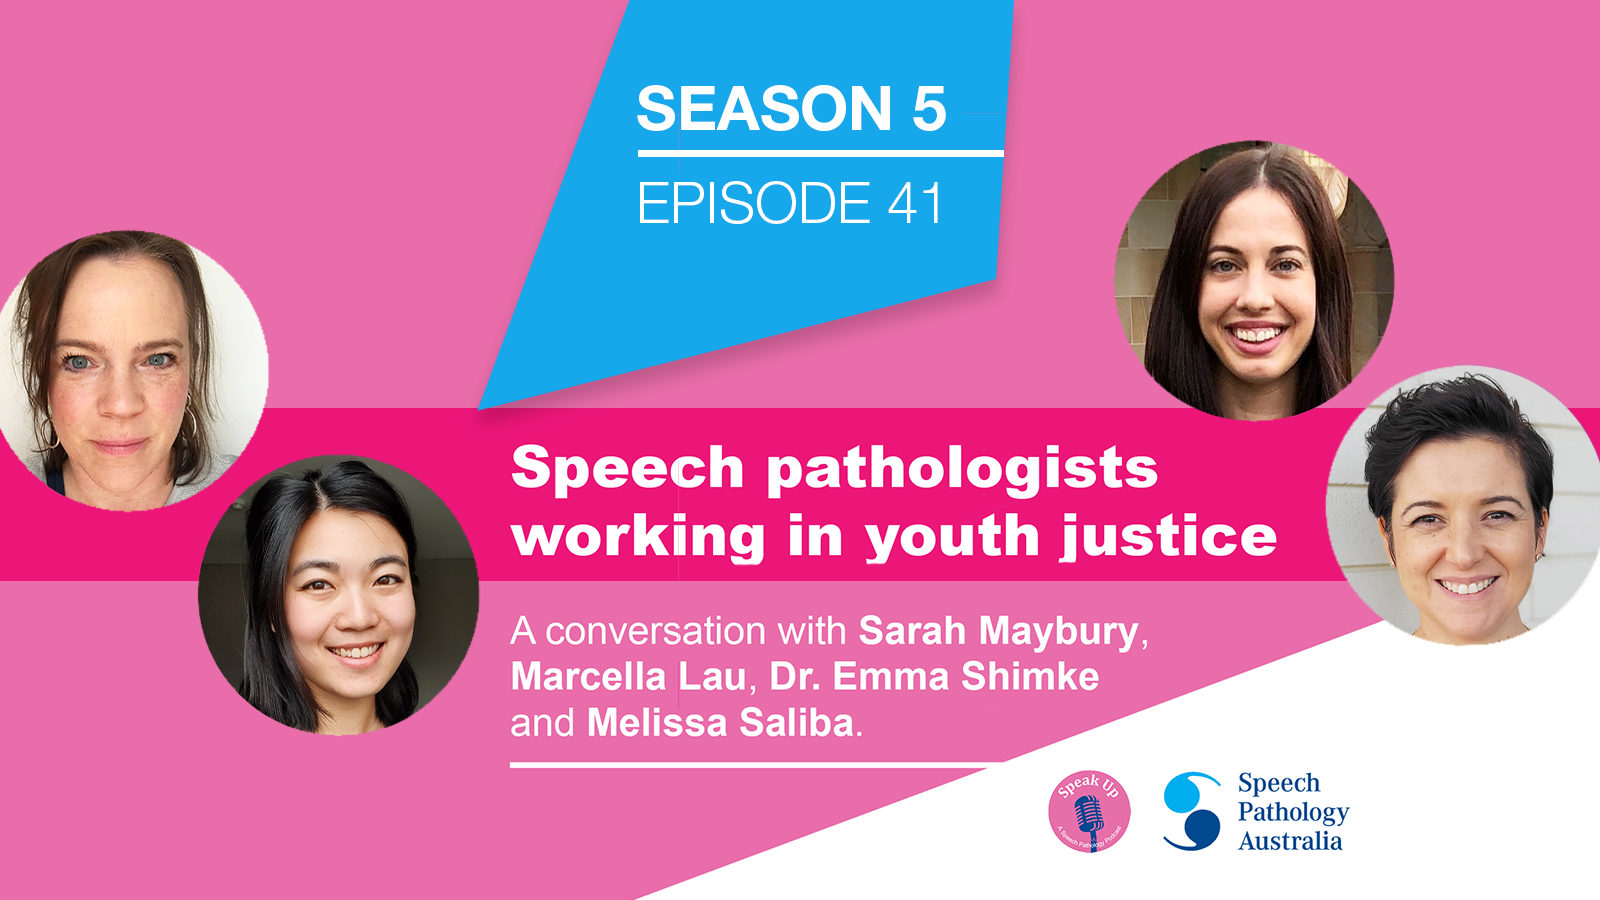 Speech pathologists working in youth justice, a conversation with Sarah Maybury, Marcella Lau, Dr. Emma Shimke and Melissa Saliba.